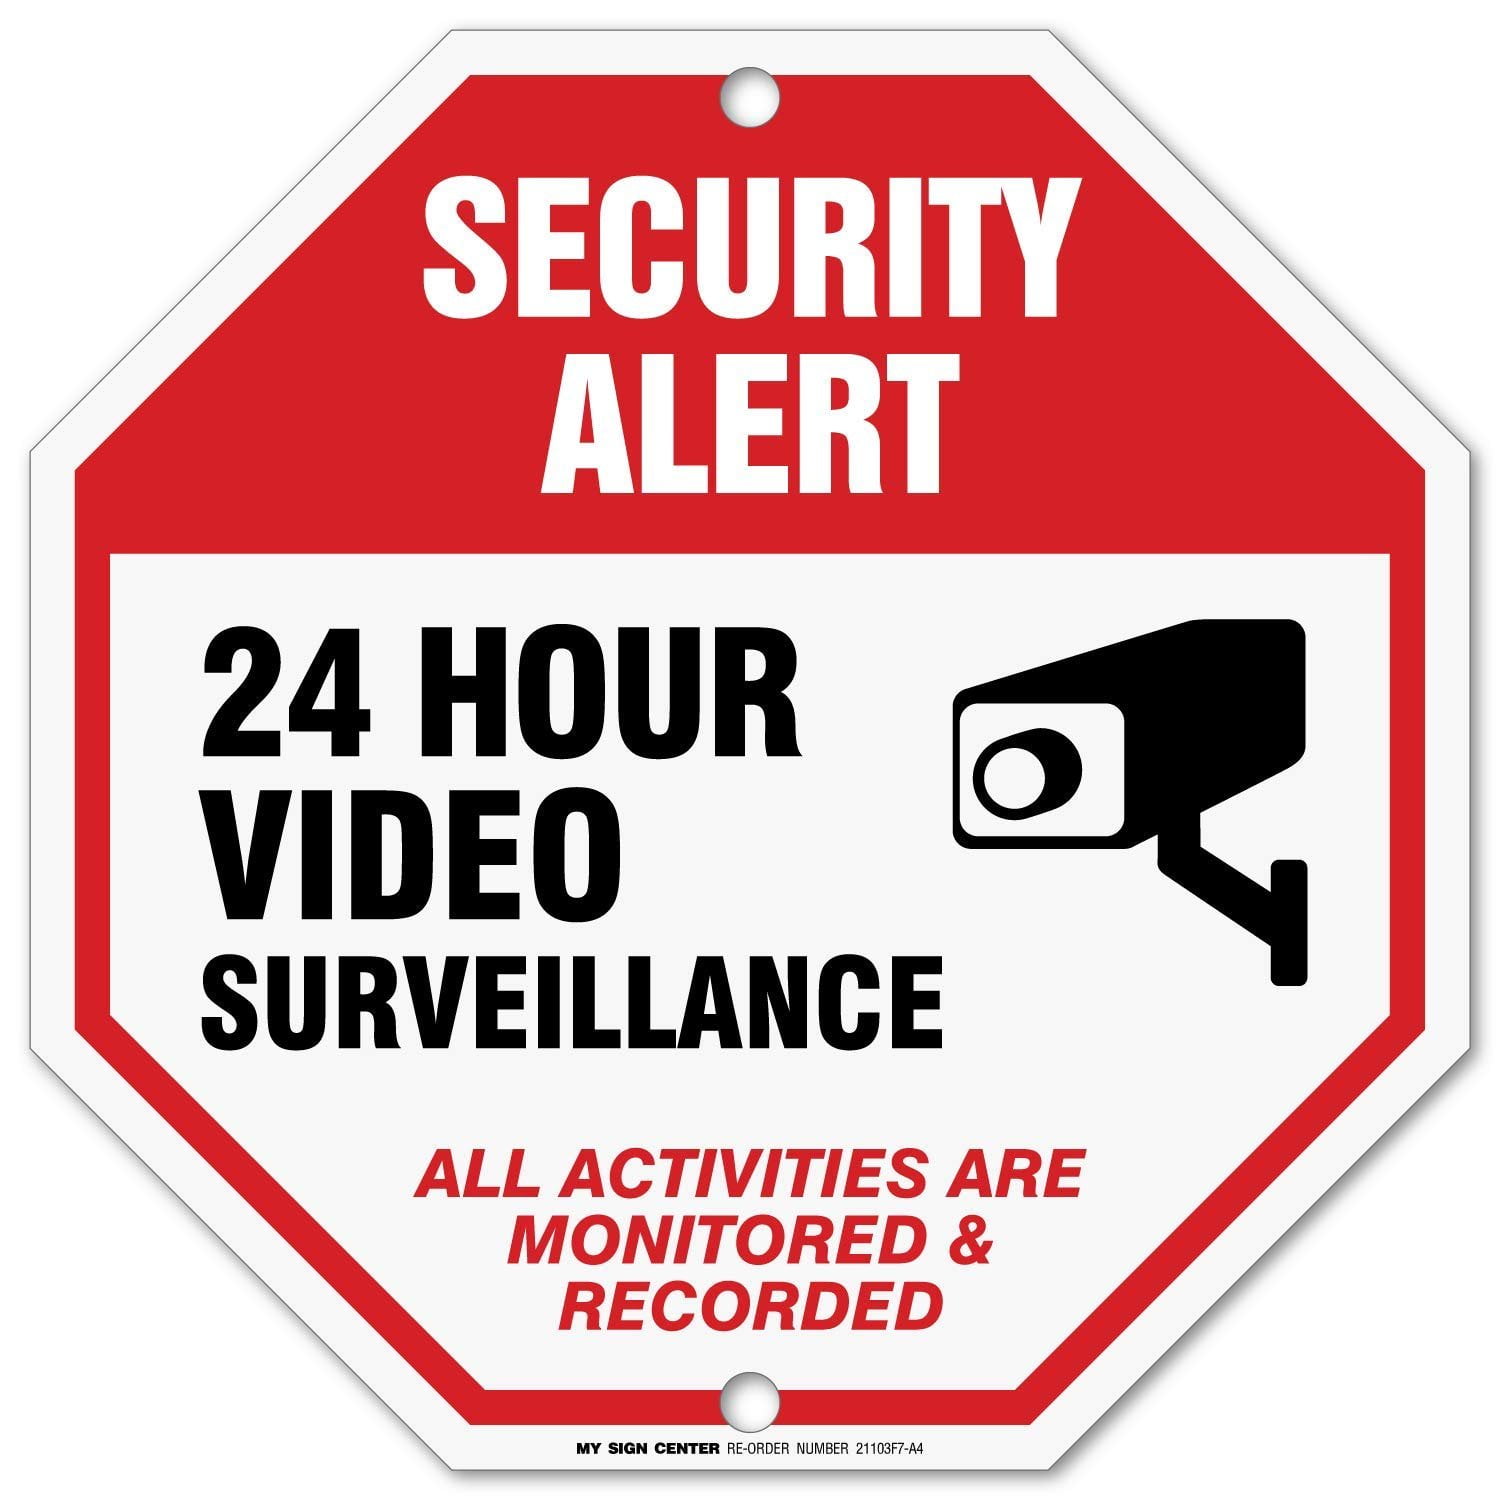 10x CCTV Surveillance Security Stickers Camera Video Recording Warning Decal 